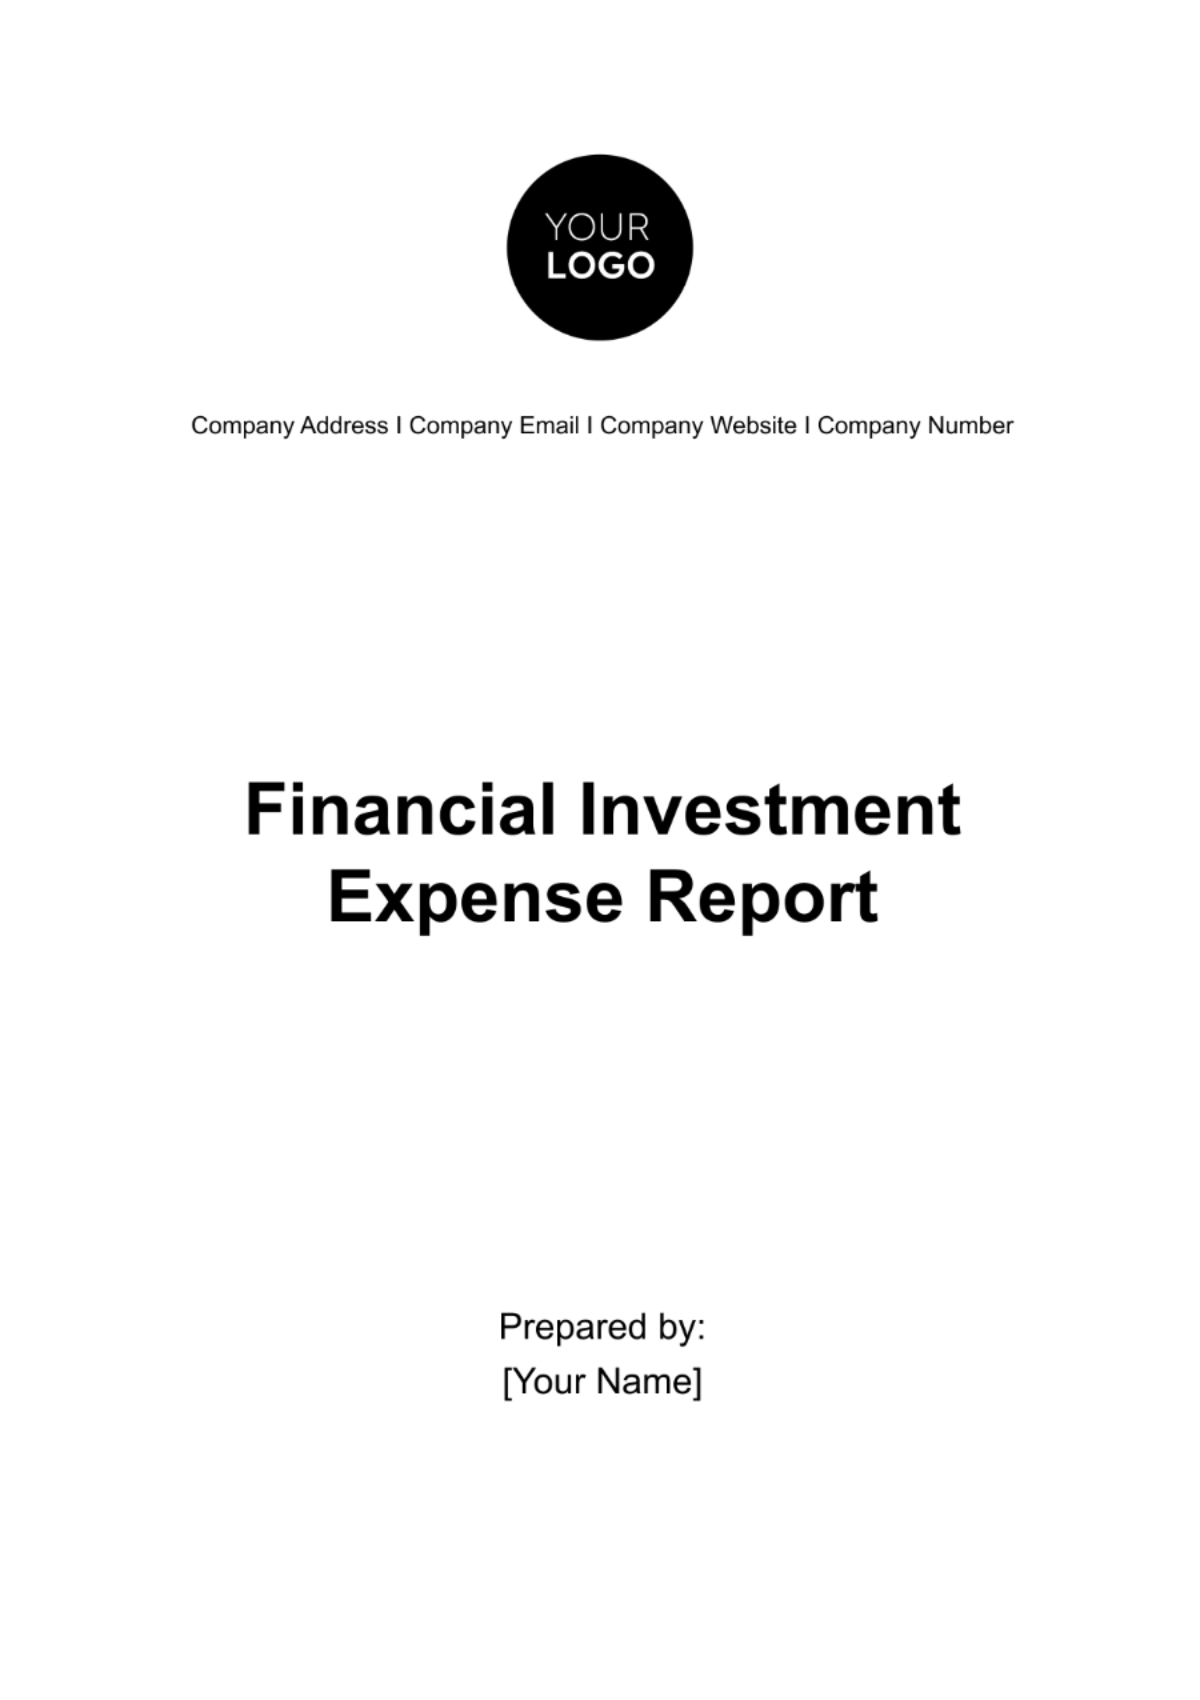 Free Financial Investment Expense Report Template